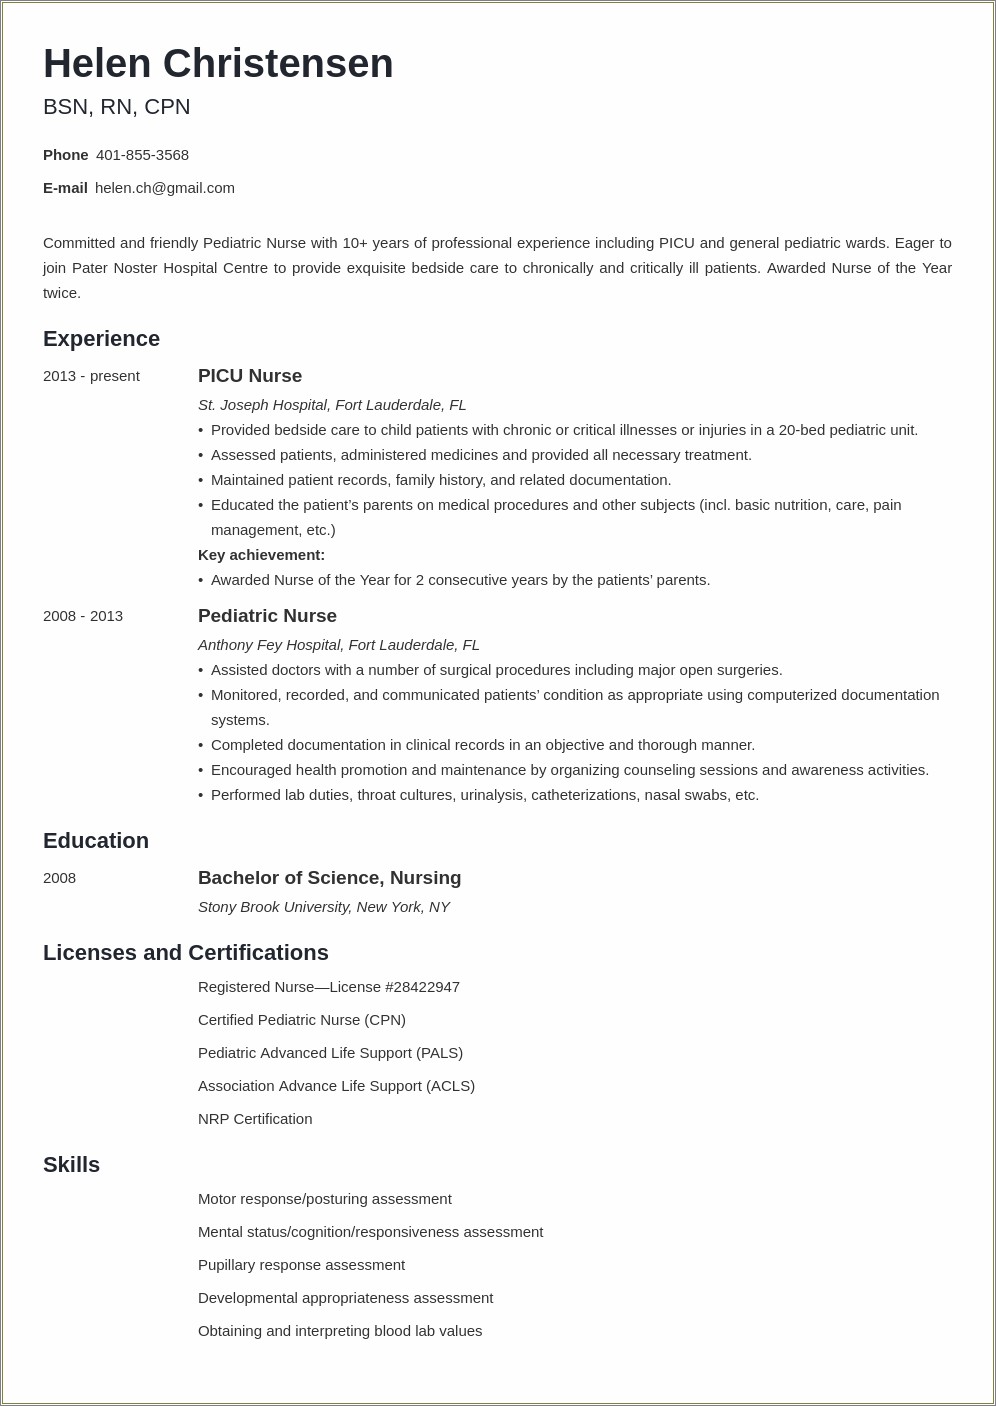 Sample Resume And Cover Letter For Pediatrician